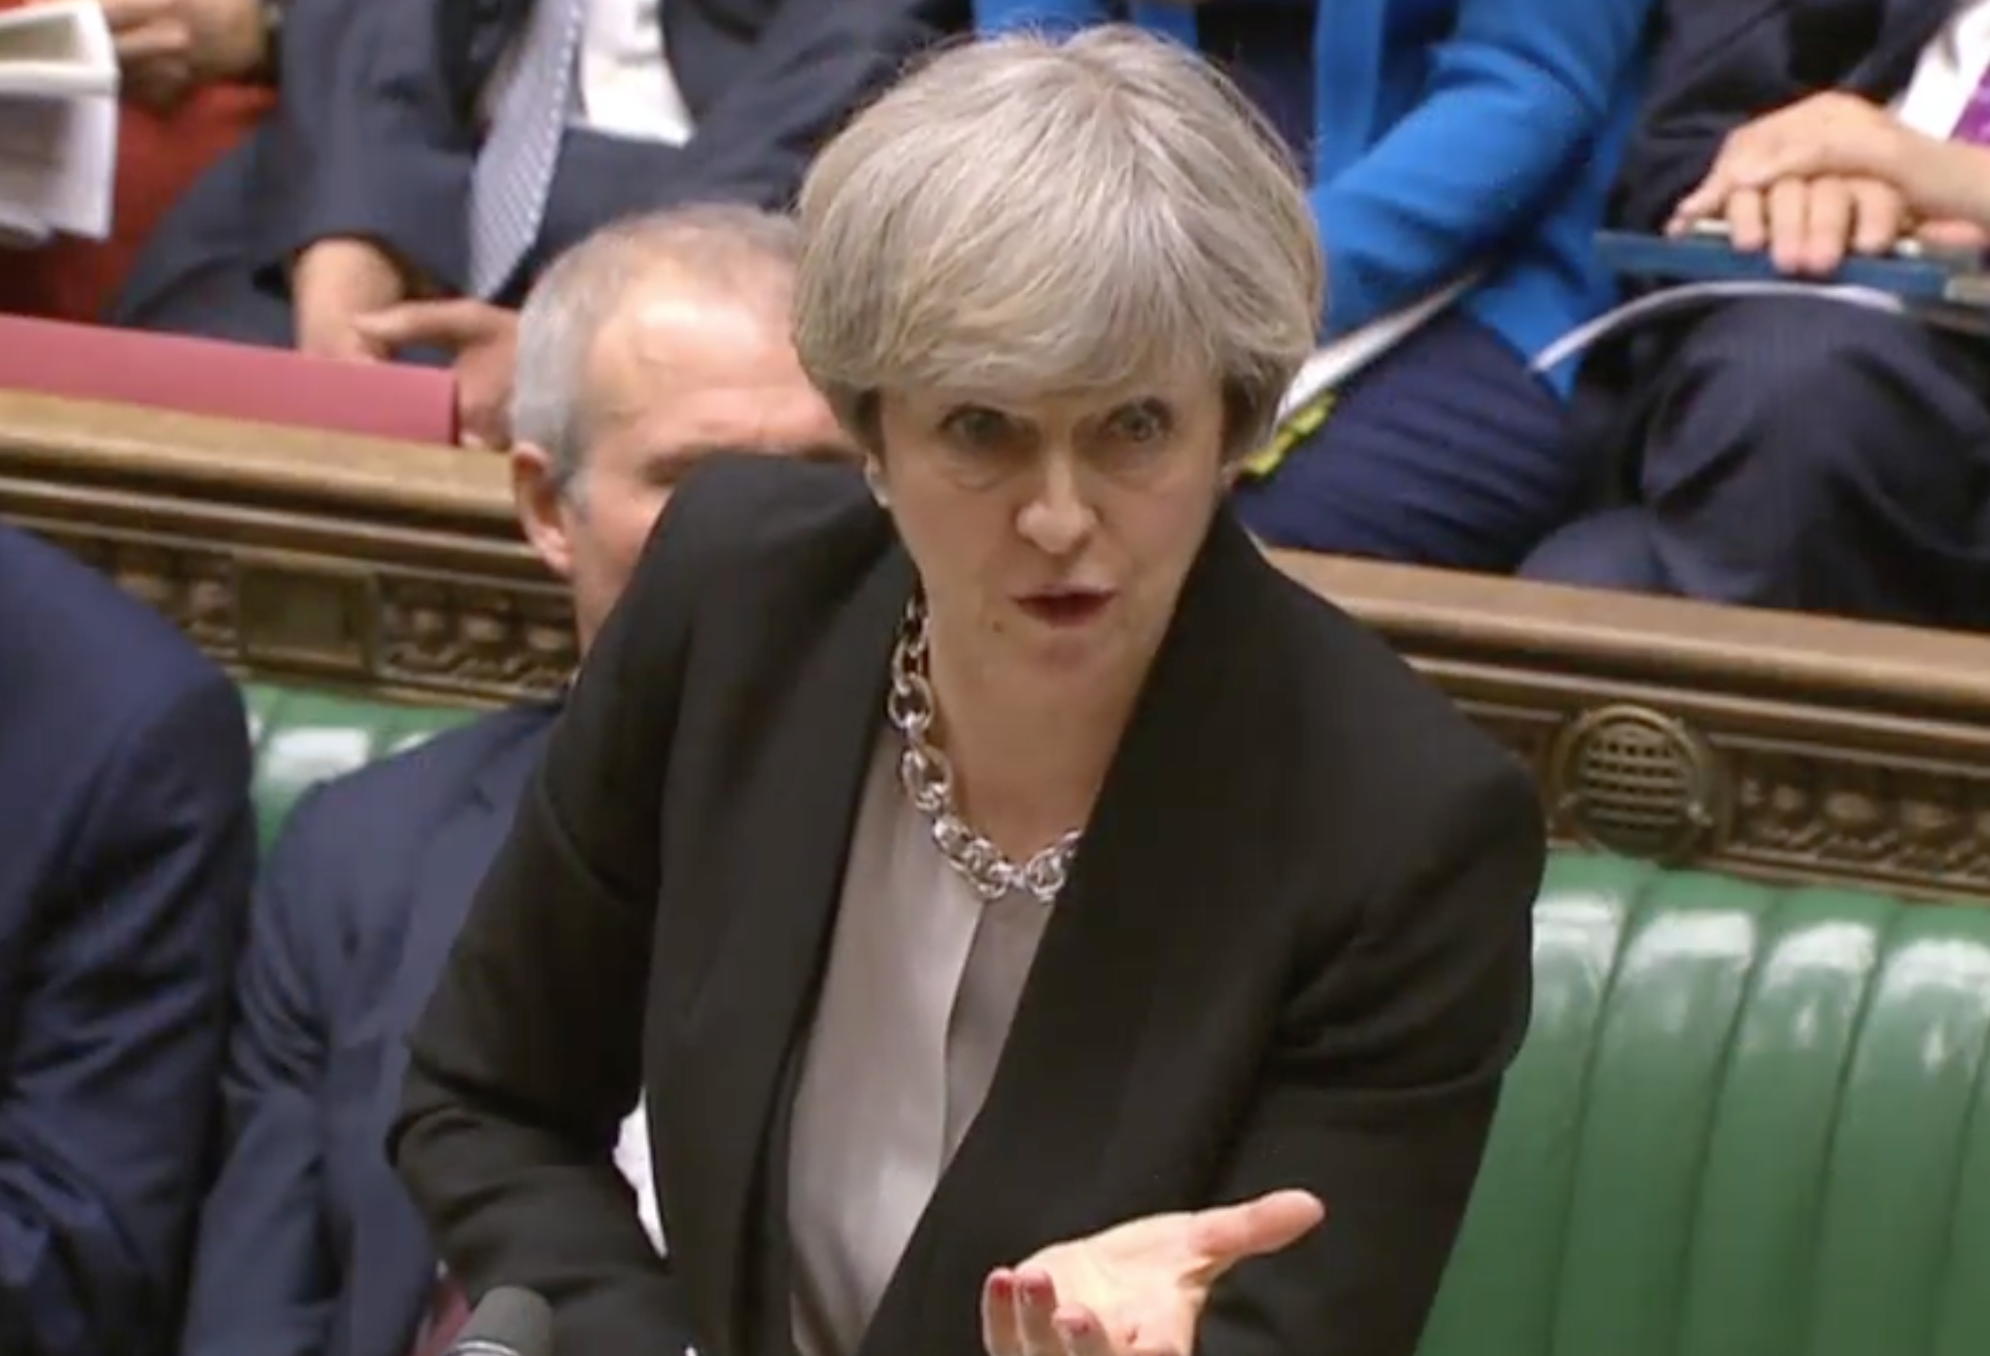 Theresa May said at PMQs she had asked the Chancellor to ensure there is ‘appropriate relief’ for firms hit by payment rises